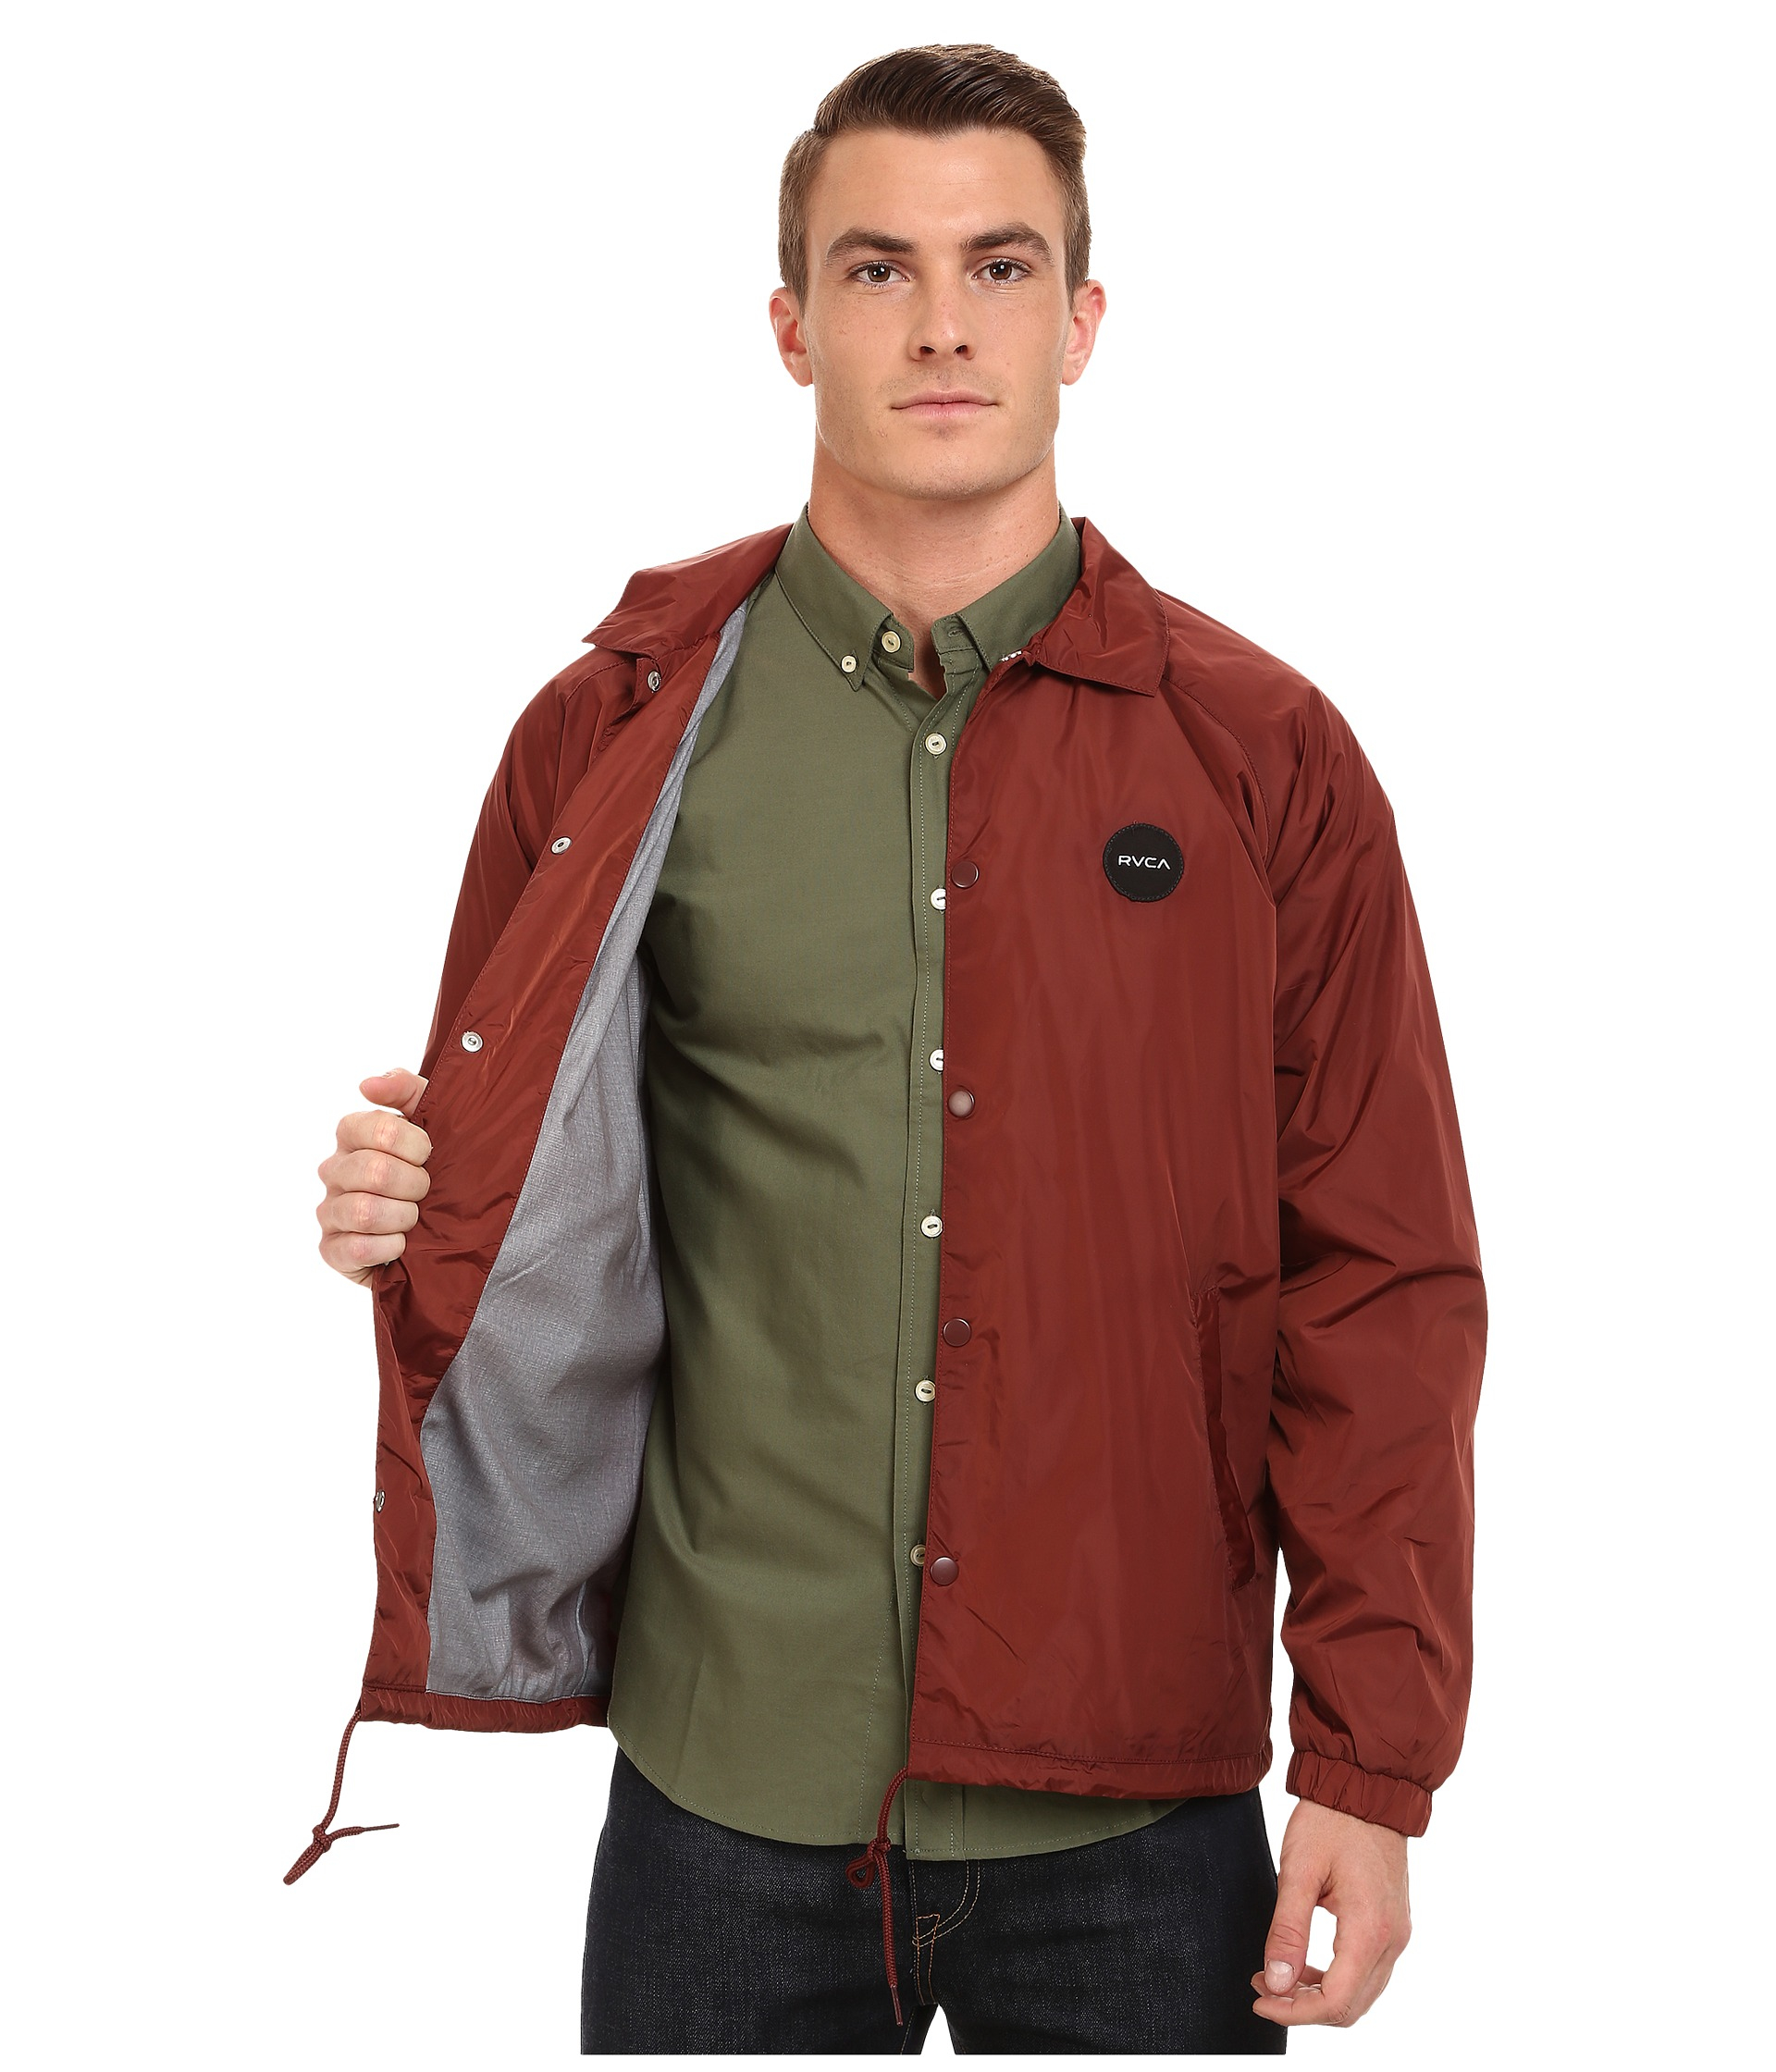 RVCA Motors Coaches Jacket in Red for Men - Lyst